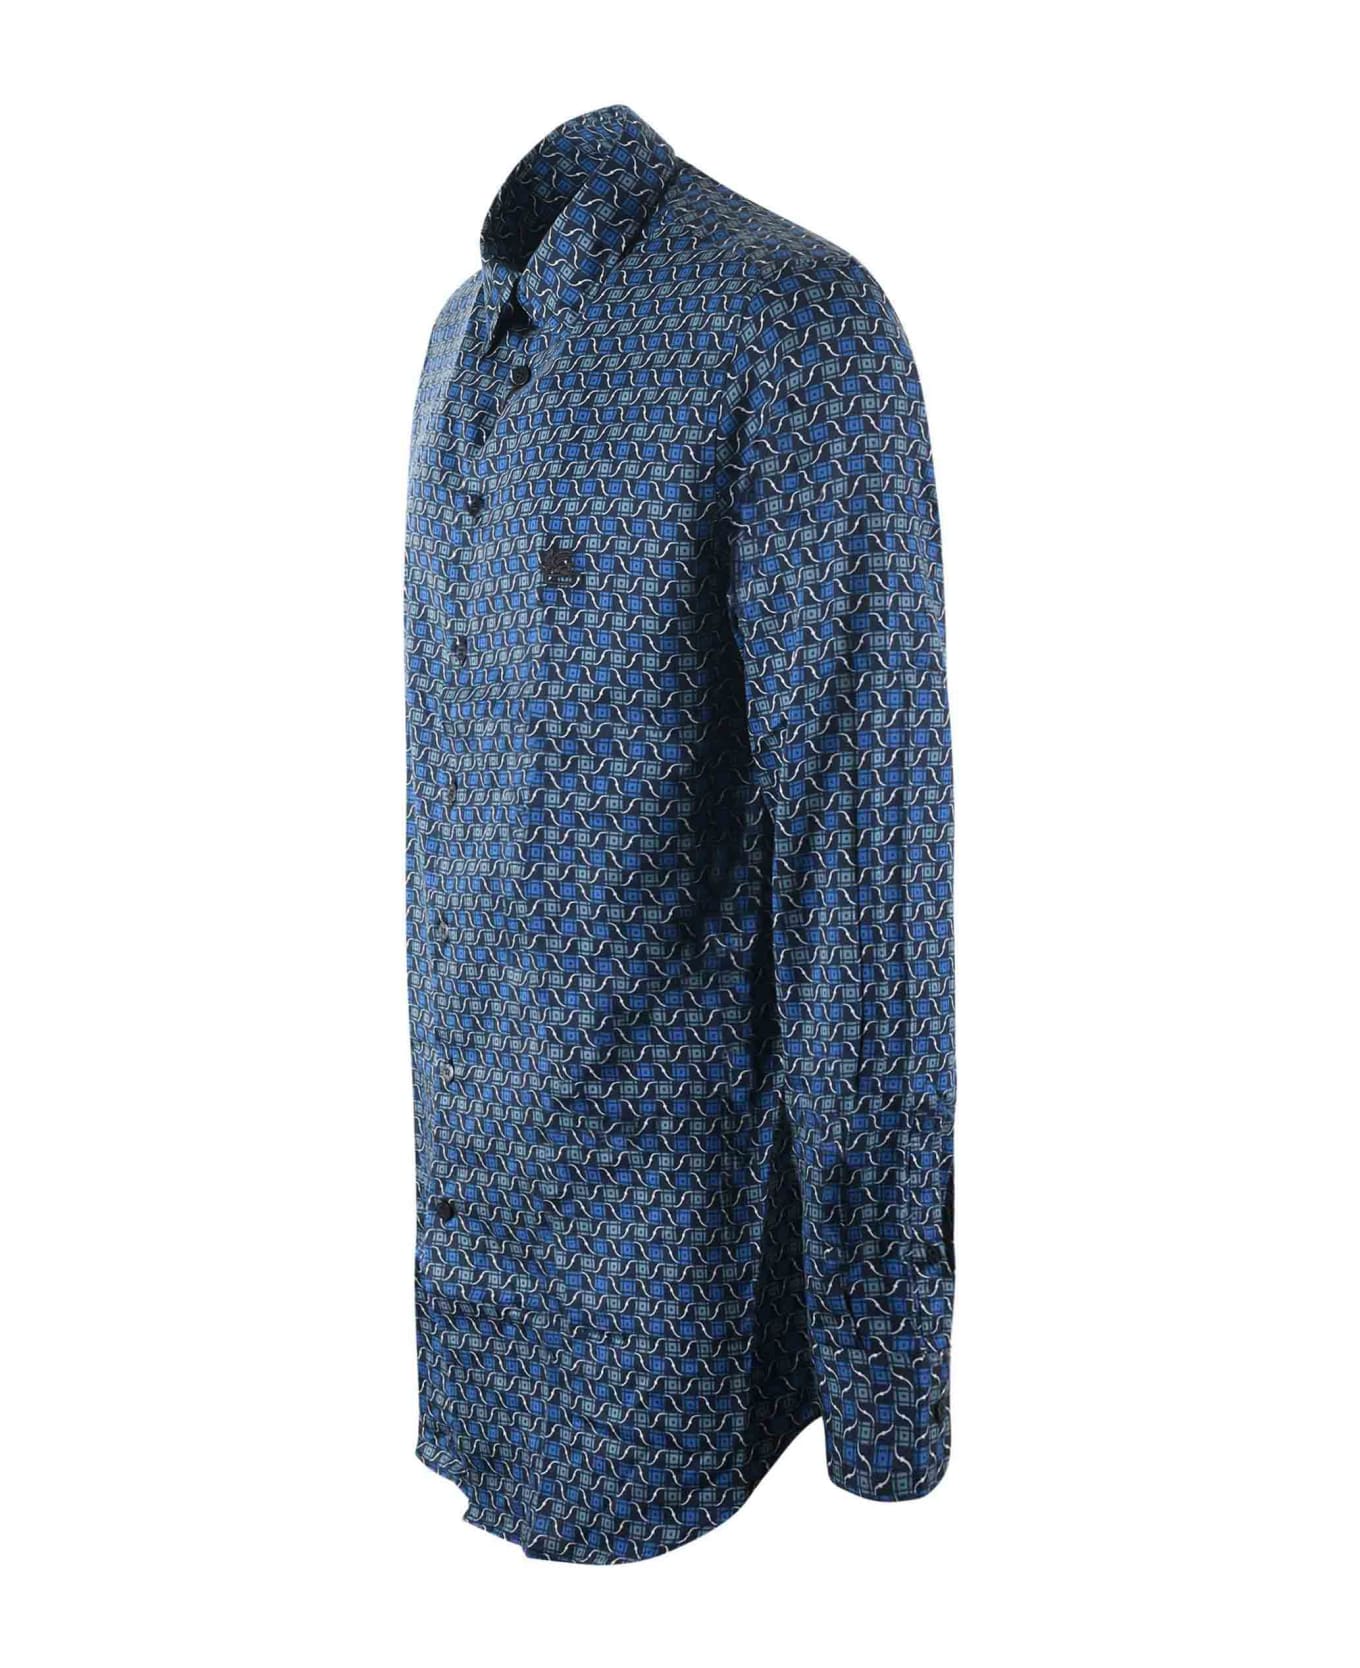 Etro All-over Patterned Long-sleeved Shirt Etro - Blu